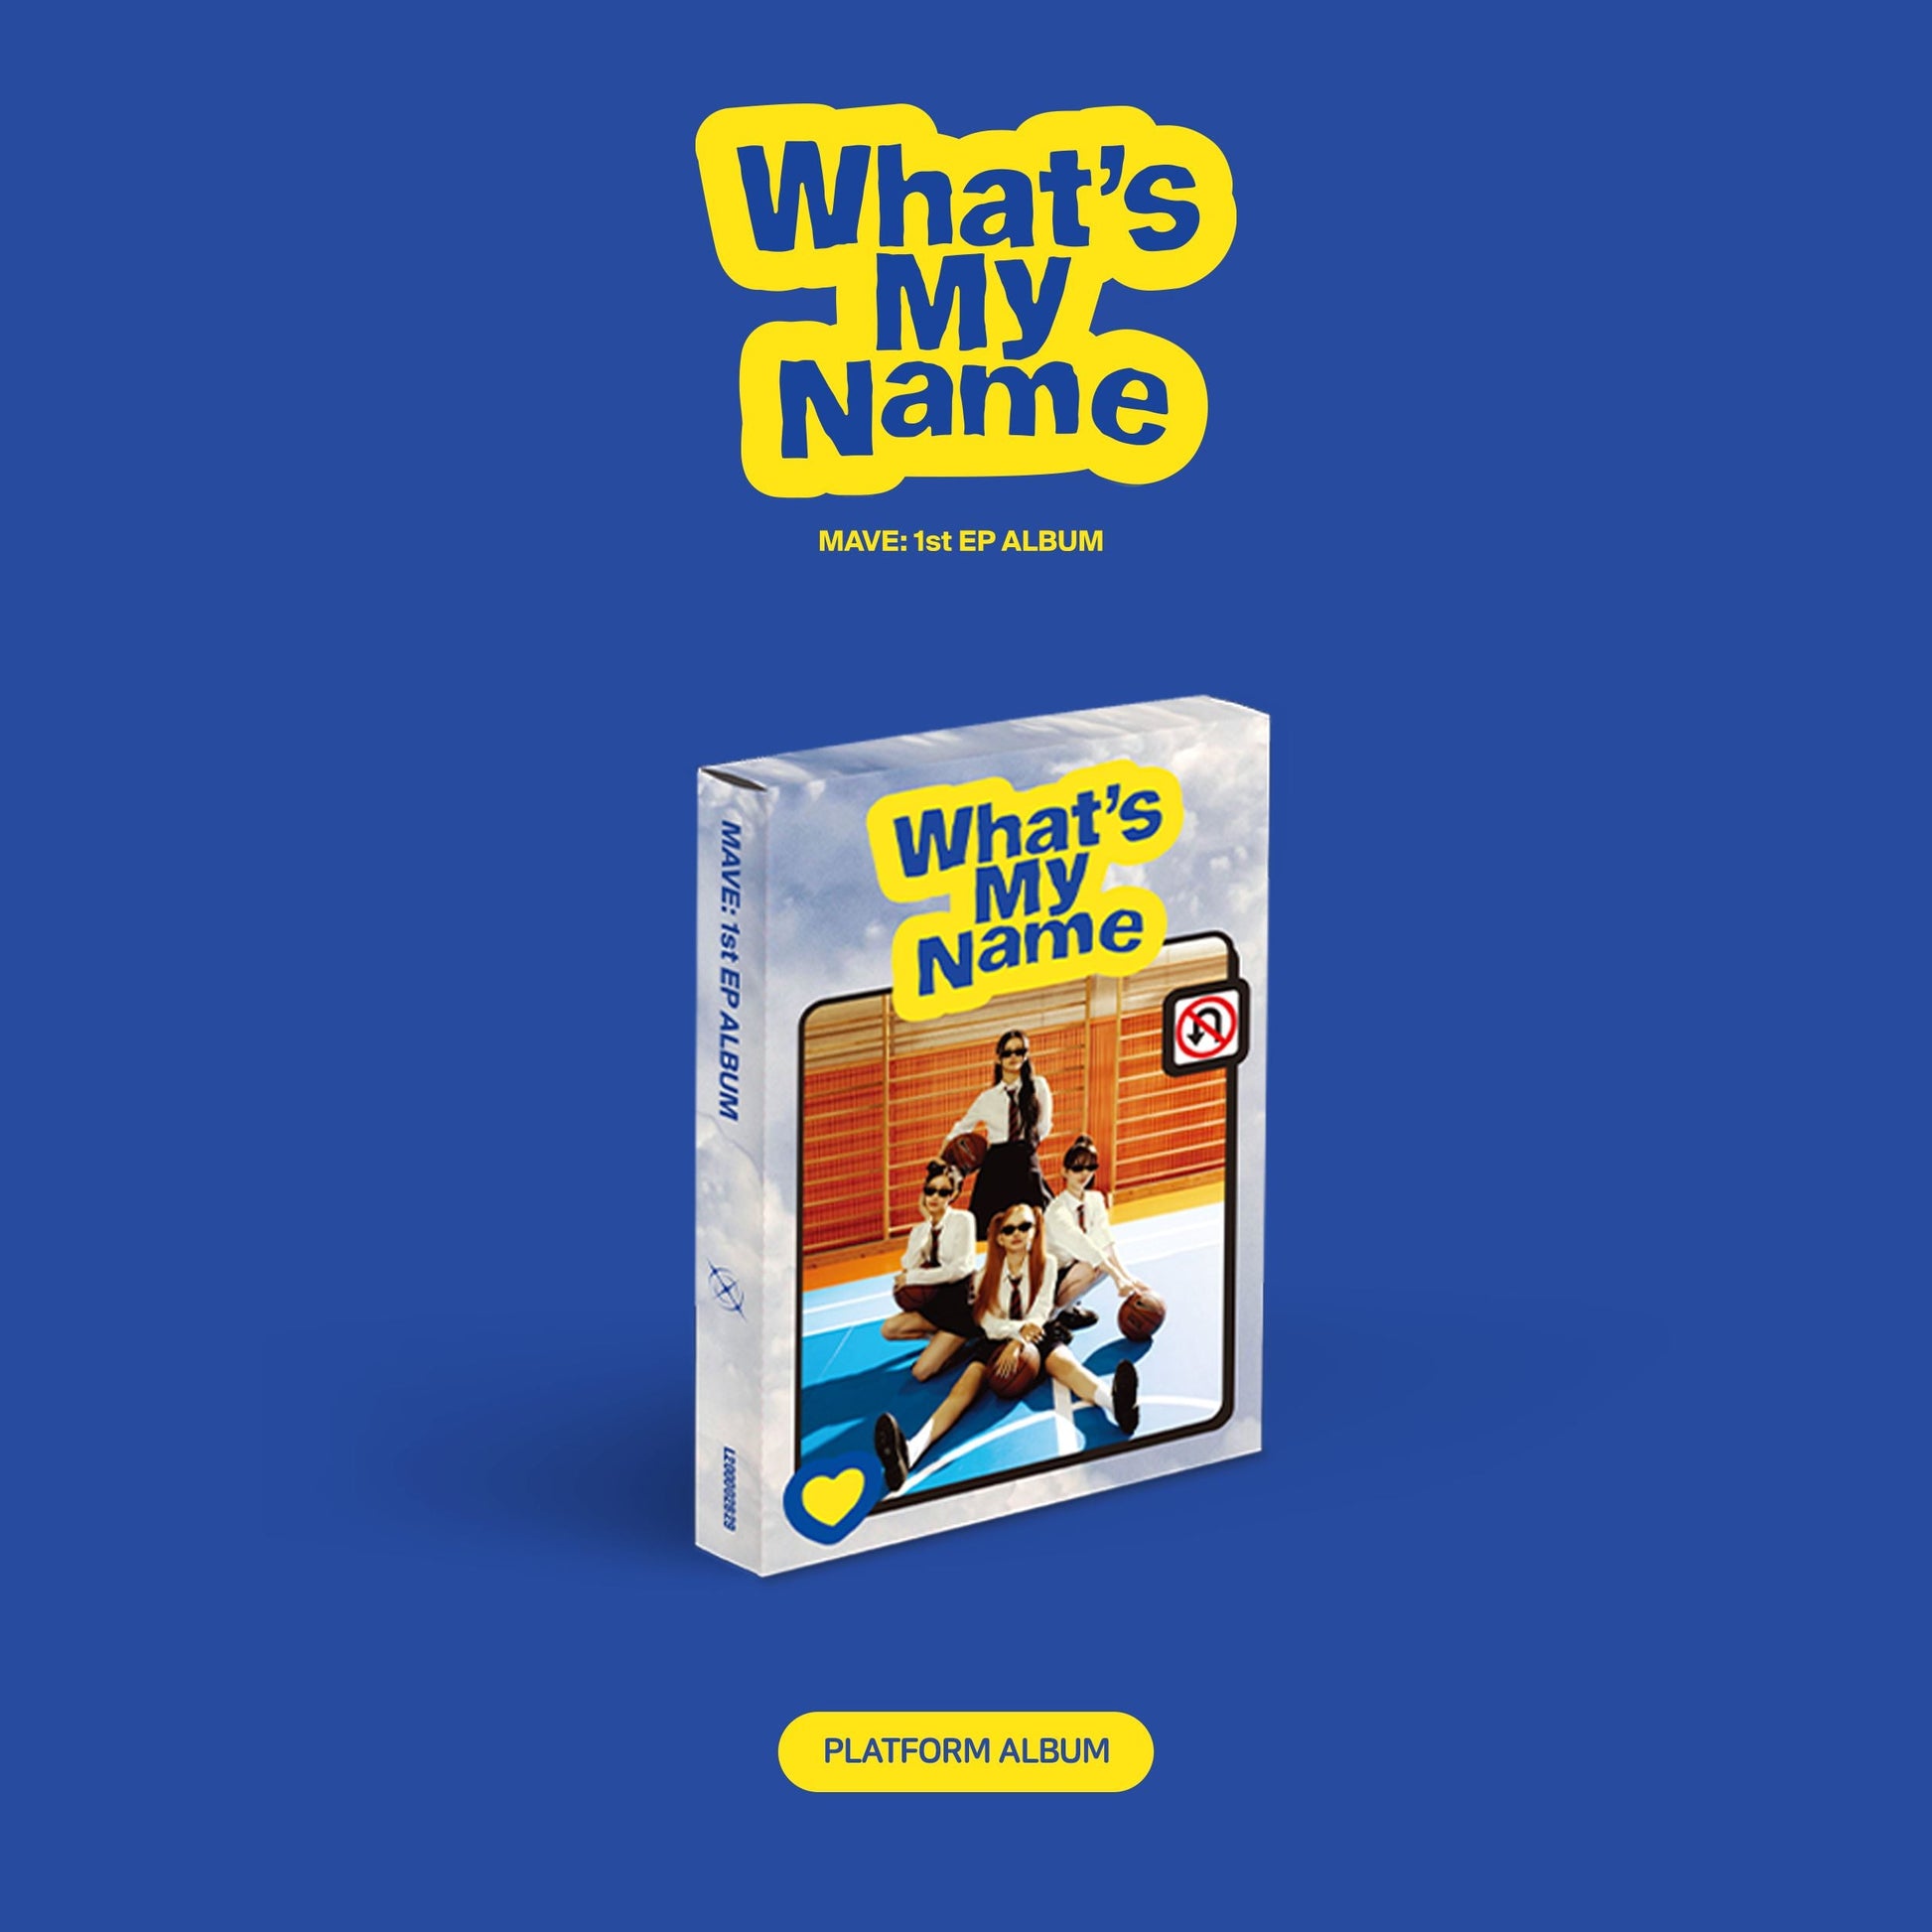 MAVE: 1ST EP ALBUM 'WHAT'S MY NAME' (PLATFORM) COVER